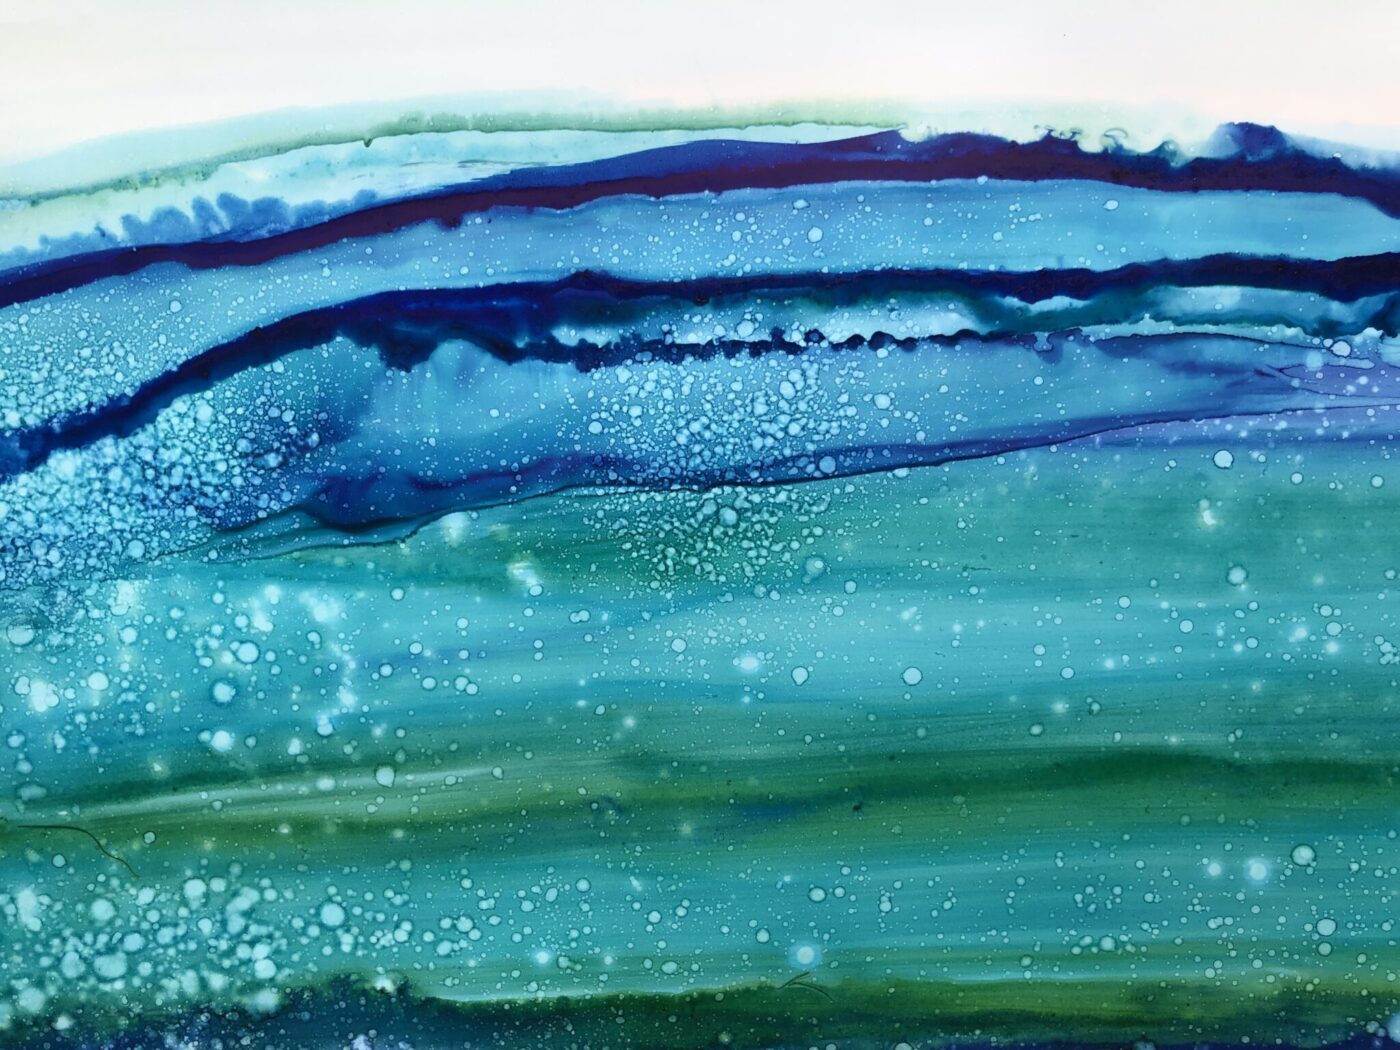 abstract underwater painting